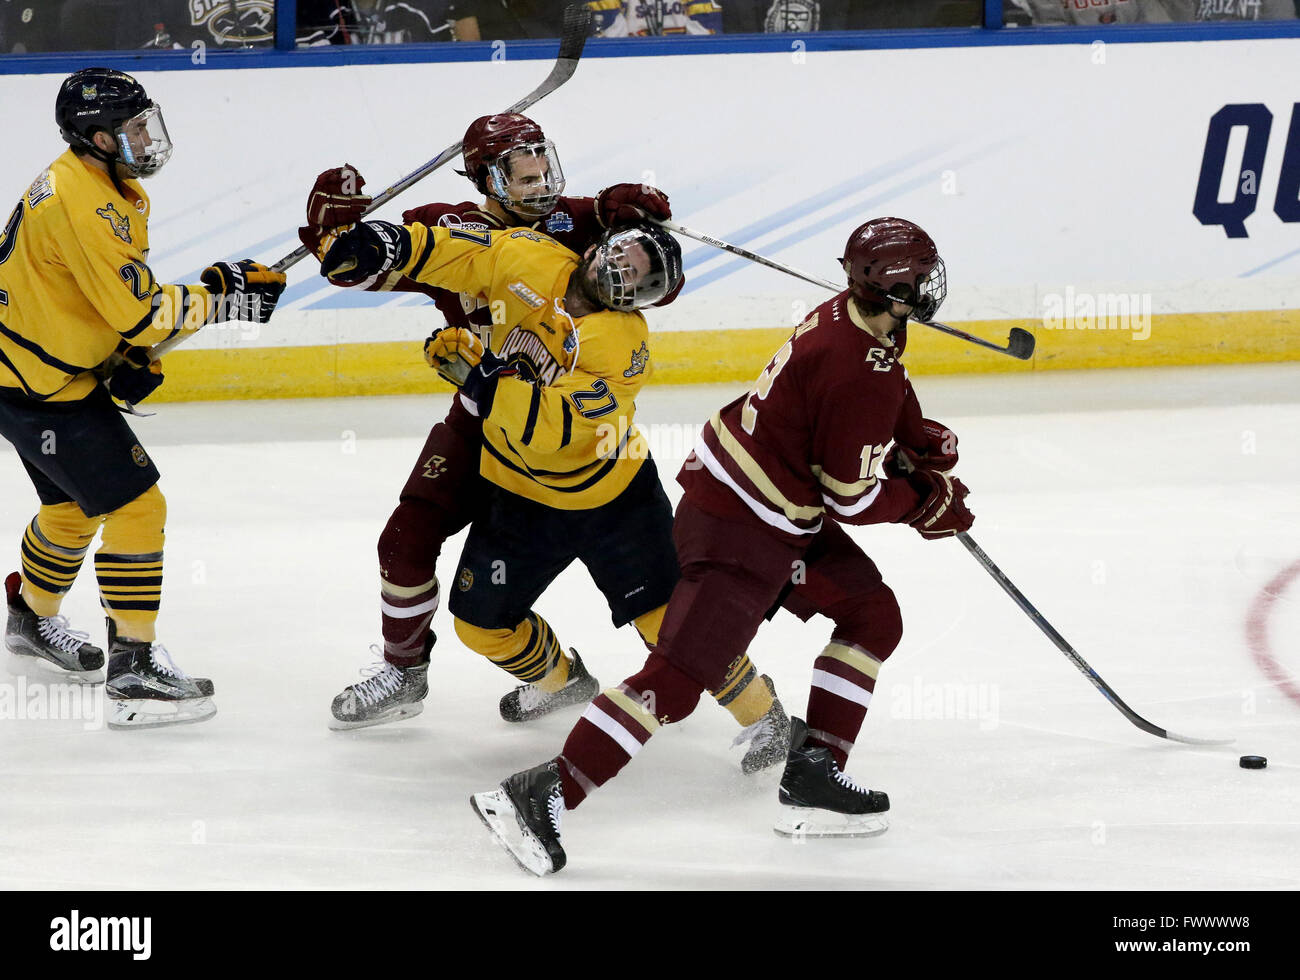 Tampa, Florida, USA. 7th Apr, 2016. DOUGLAS R. CLIFFORD.Boston College Eagles forward Colin White (18), center, offends Quinnipiac Bobcats defenseman Kevin McKernan (27) in the neutral zone during the first period of Thursday's (4/7/16) semifinal game during the 2016 Frozen Four live from Amalie Arena in Tampa. © Douglas R. Clifford/Tampa Bay Times/ZUMA Wire/Alamy Live News Stock Photo